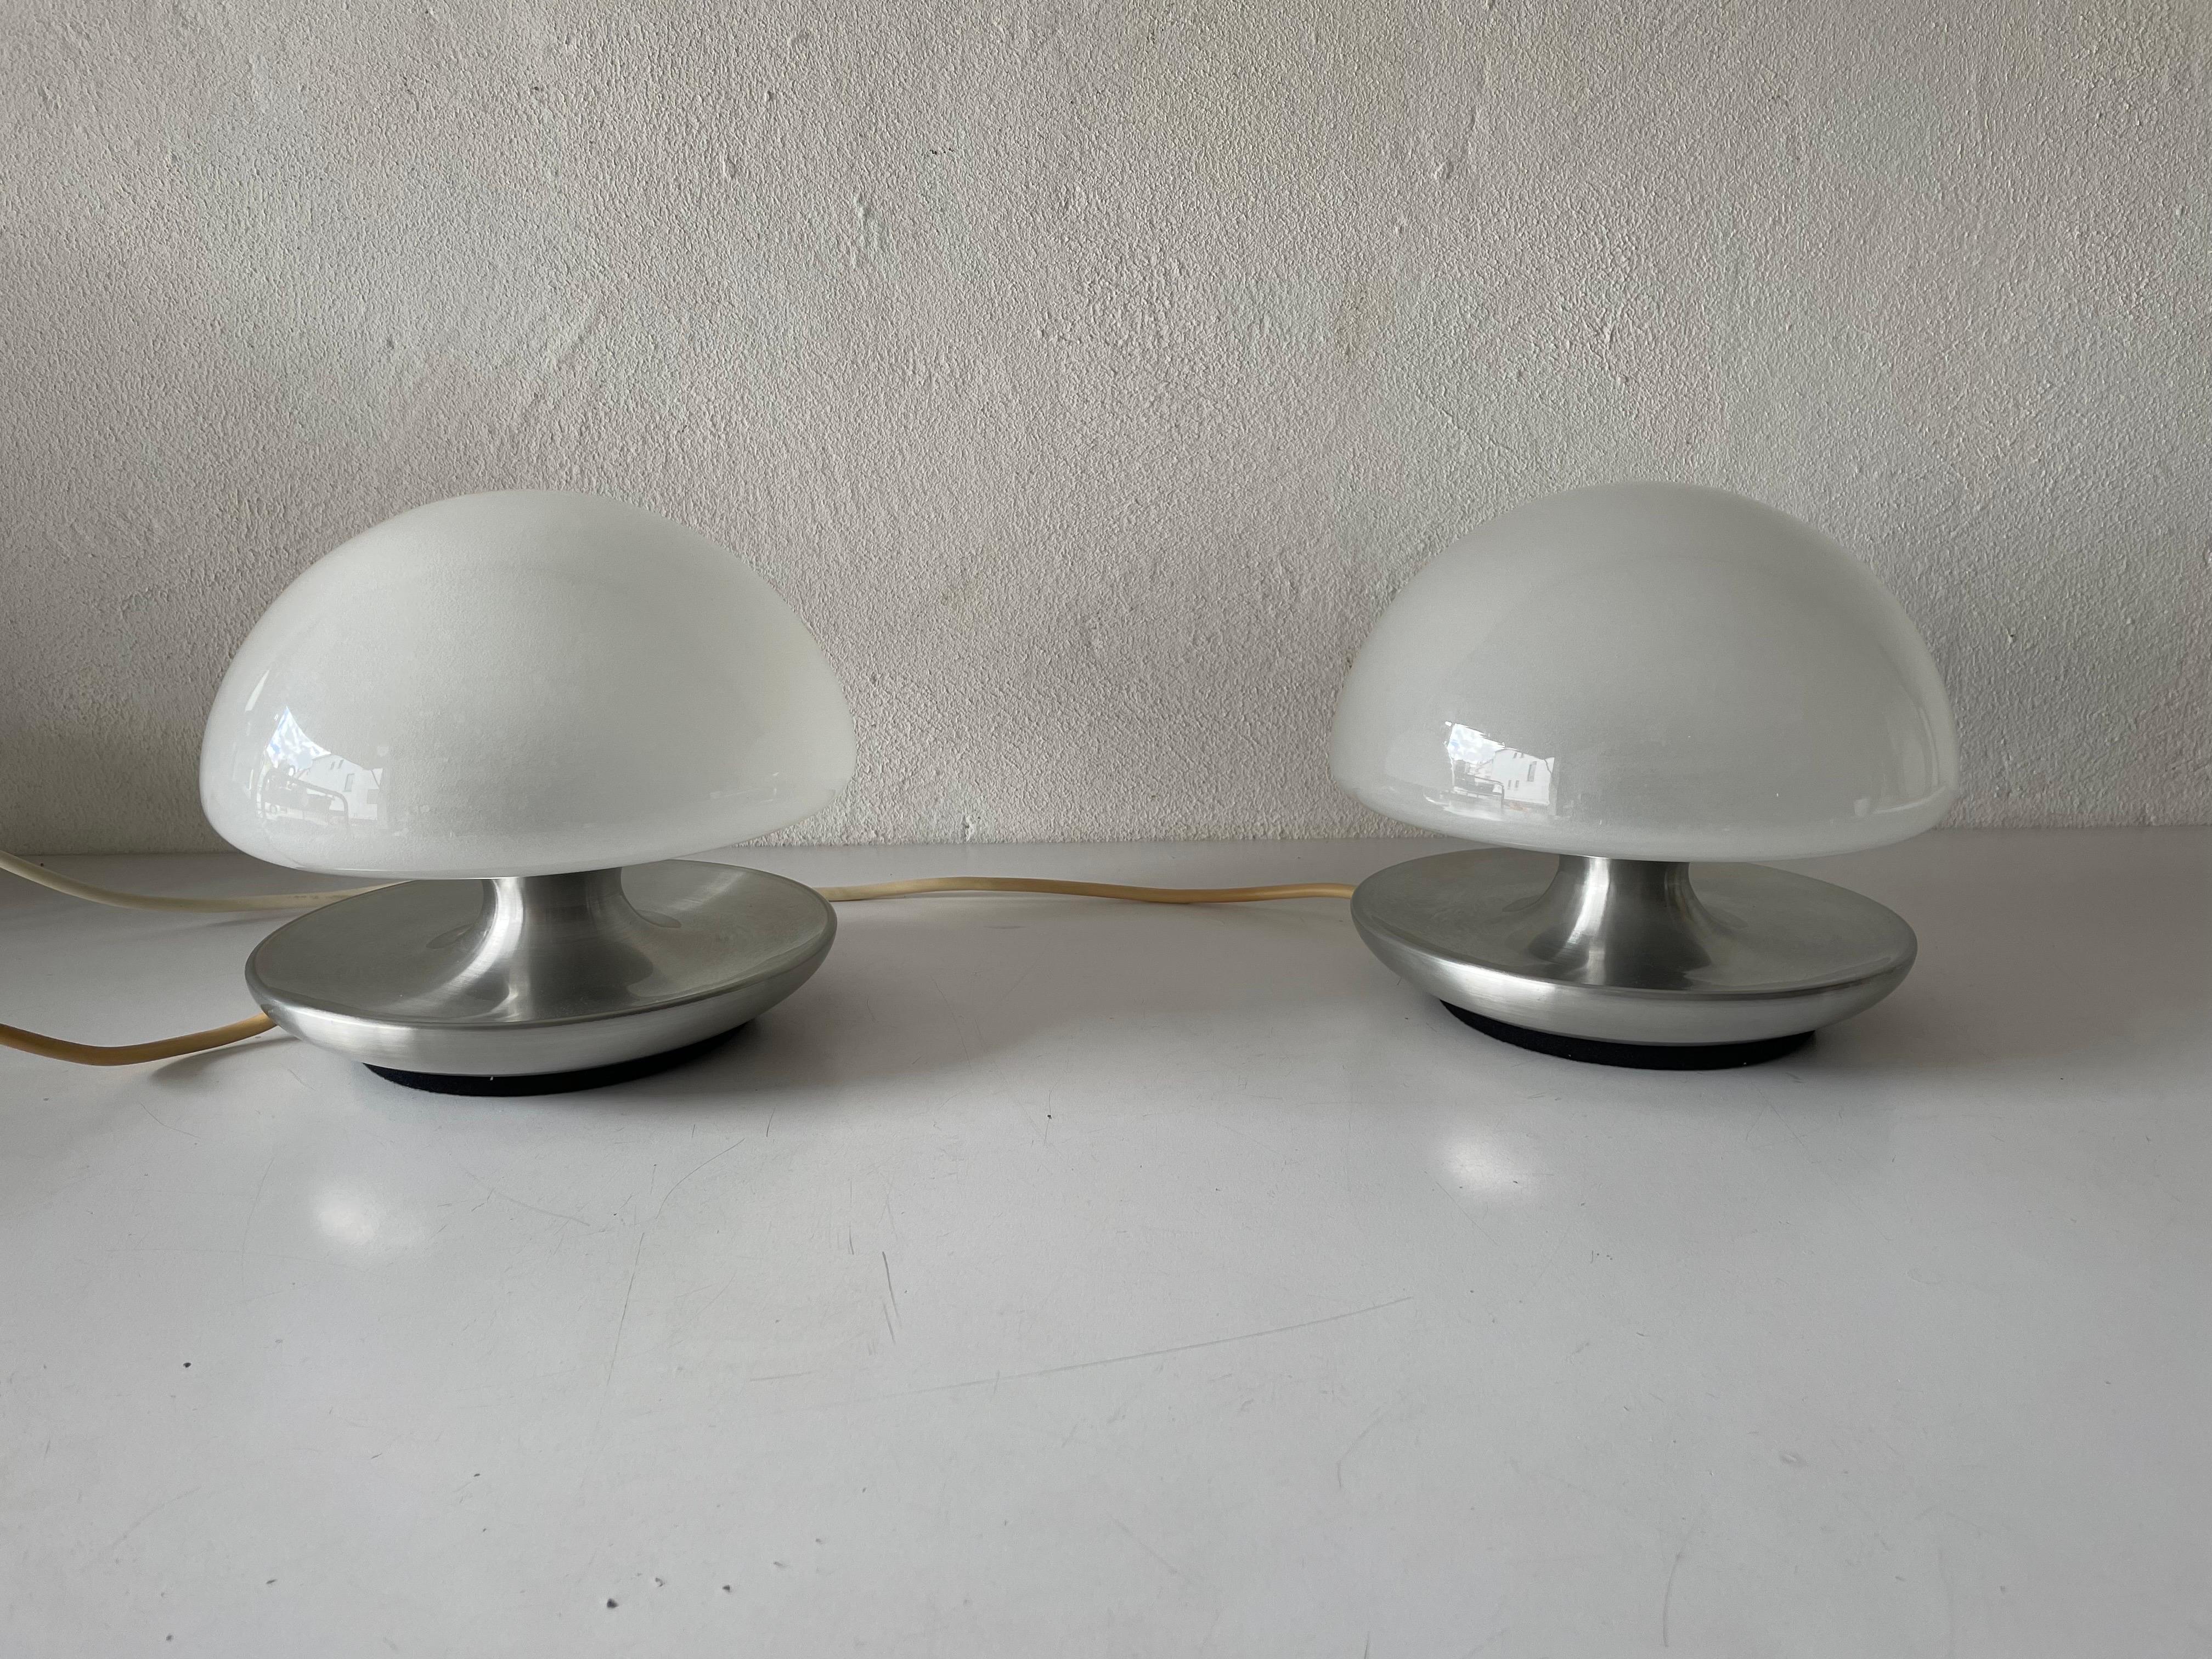 Mushroom glass Pair of Luxury Italian Table Lamps by Vittorio Balli & Romeo Ballardini for Sirrah, 1970s, Italy

Lampshade is in very good vintage condition.

When you turn the glass of the lamp to the left and right by 1 cm (almost hand touch) the